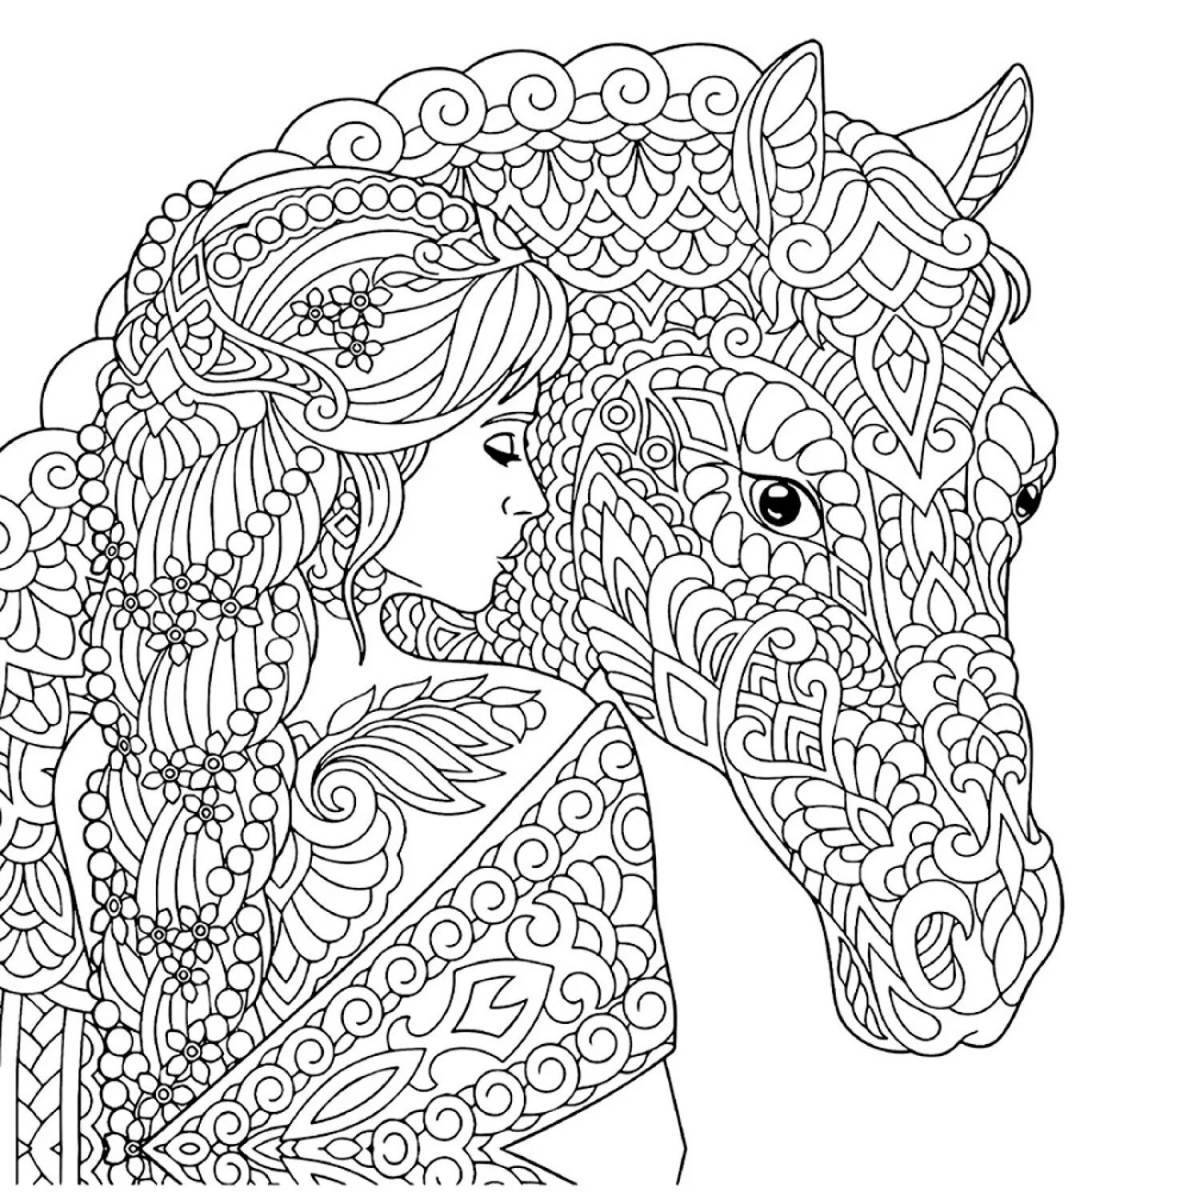 Refreshing anti-stress coloring book for teenagers